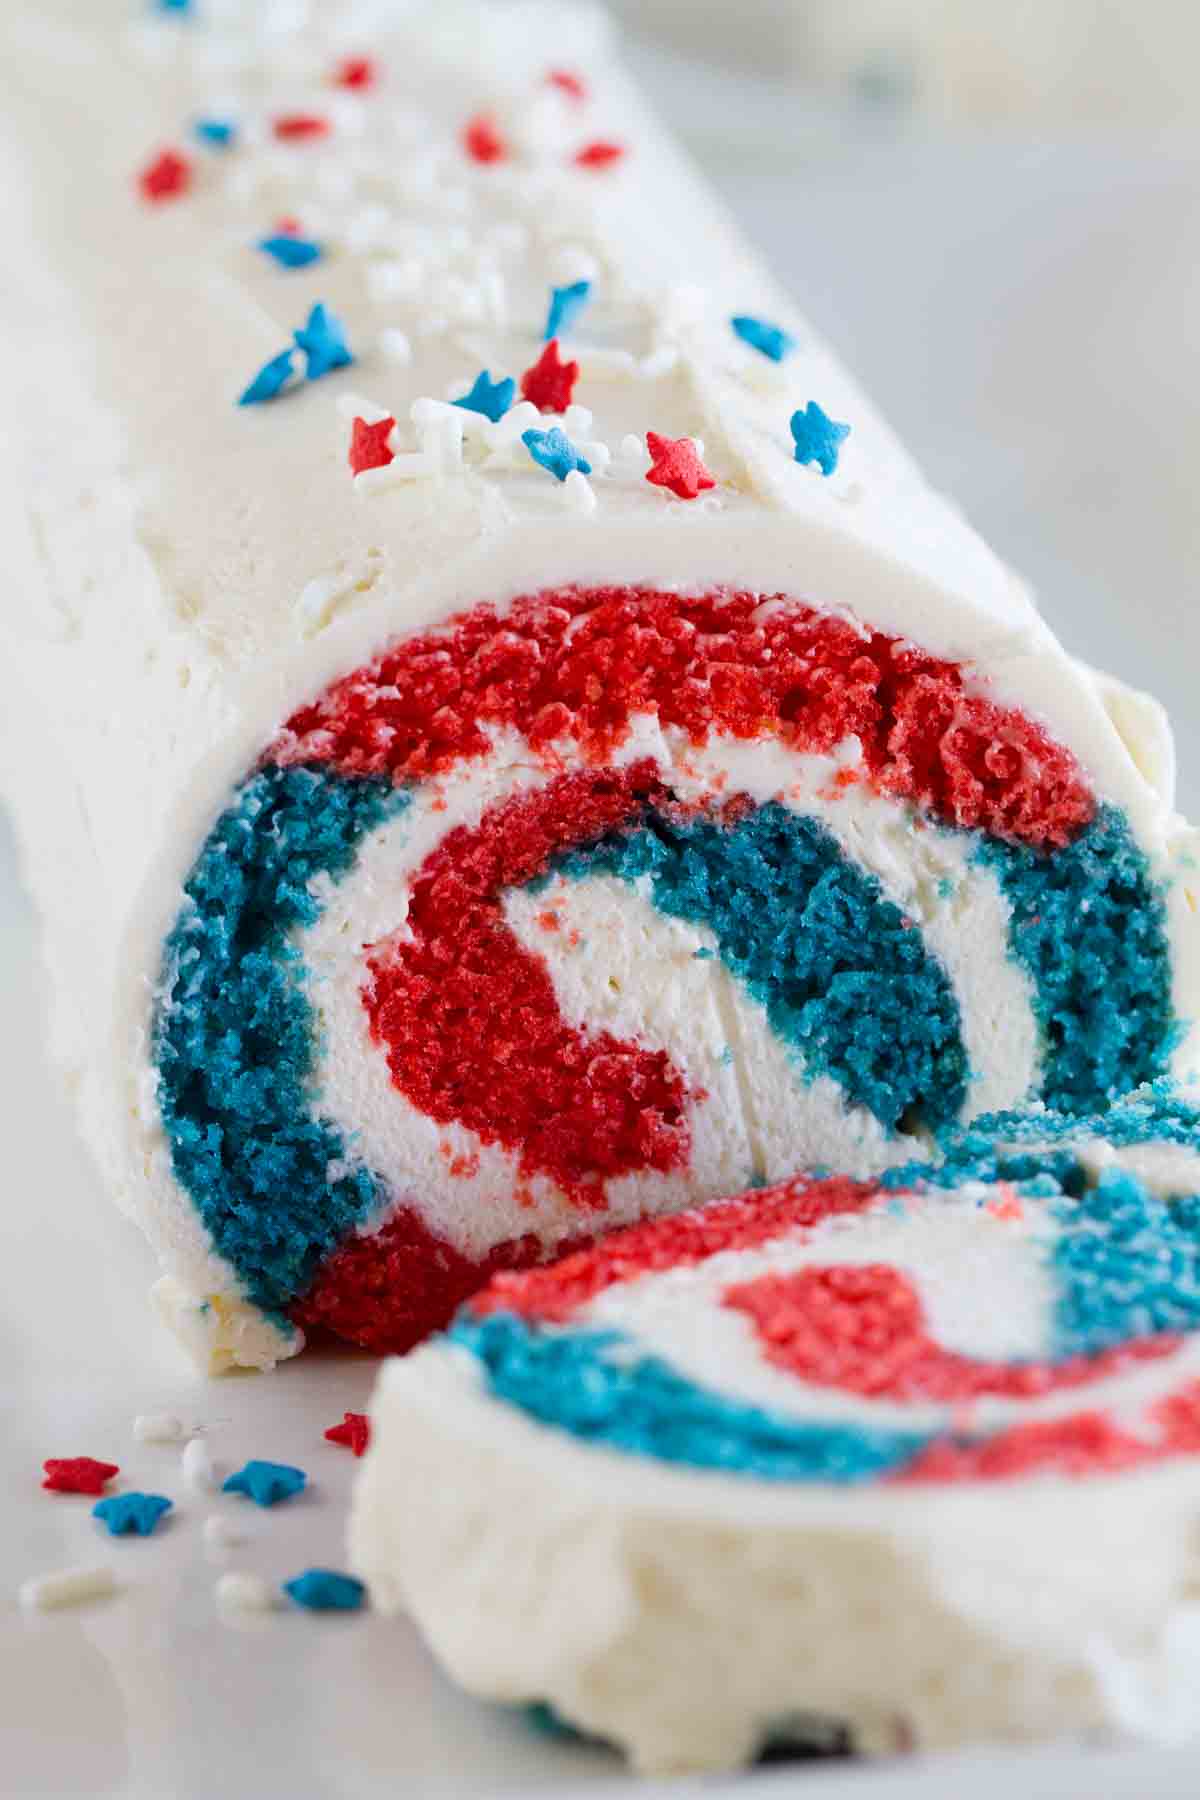 red white and blue cake roll with star sprinkles cut showing interior